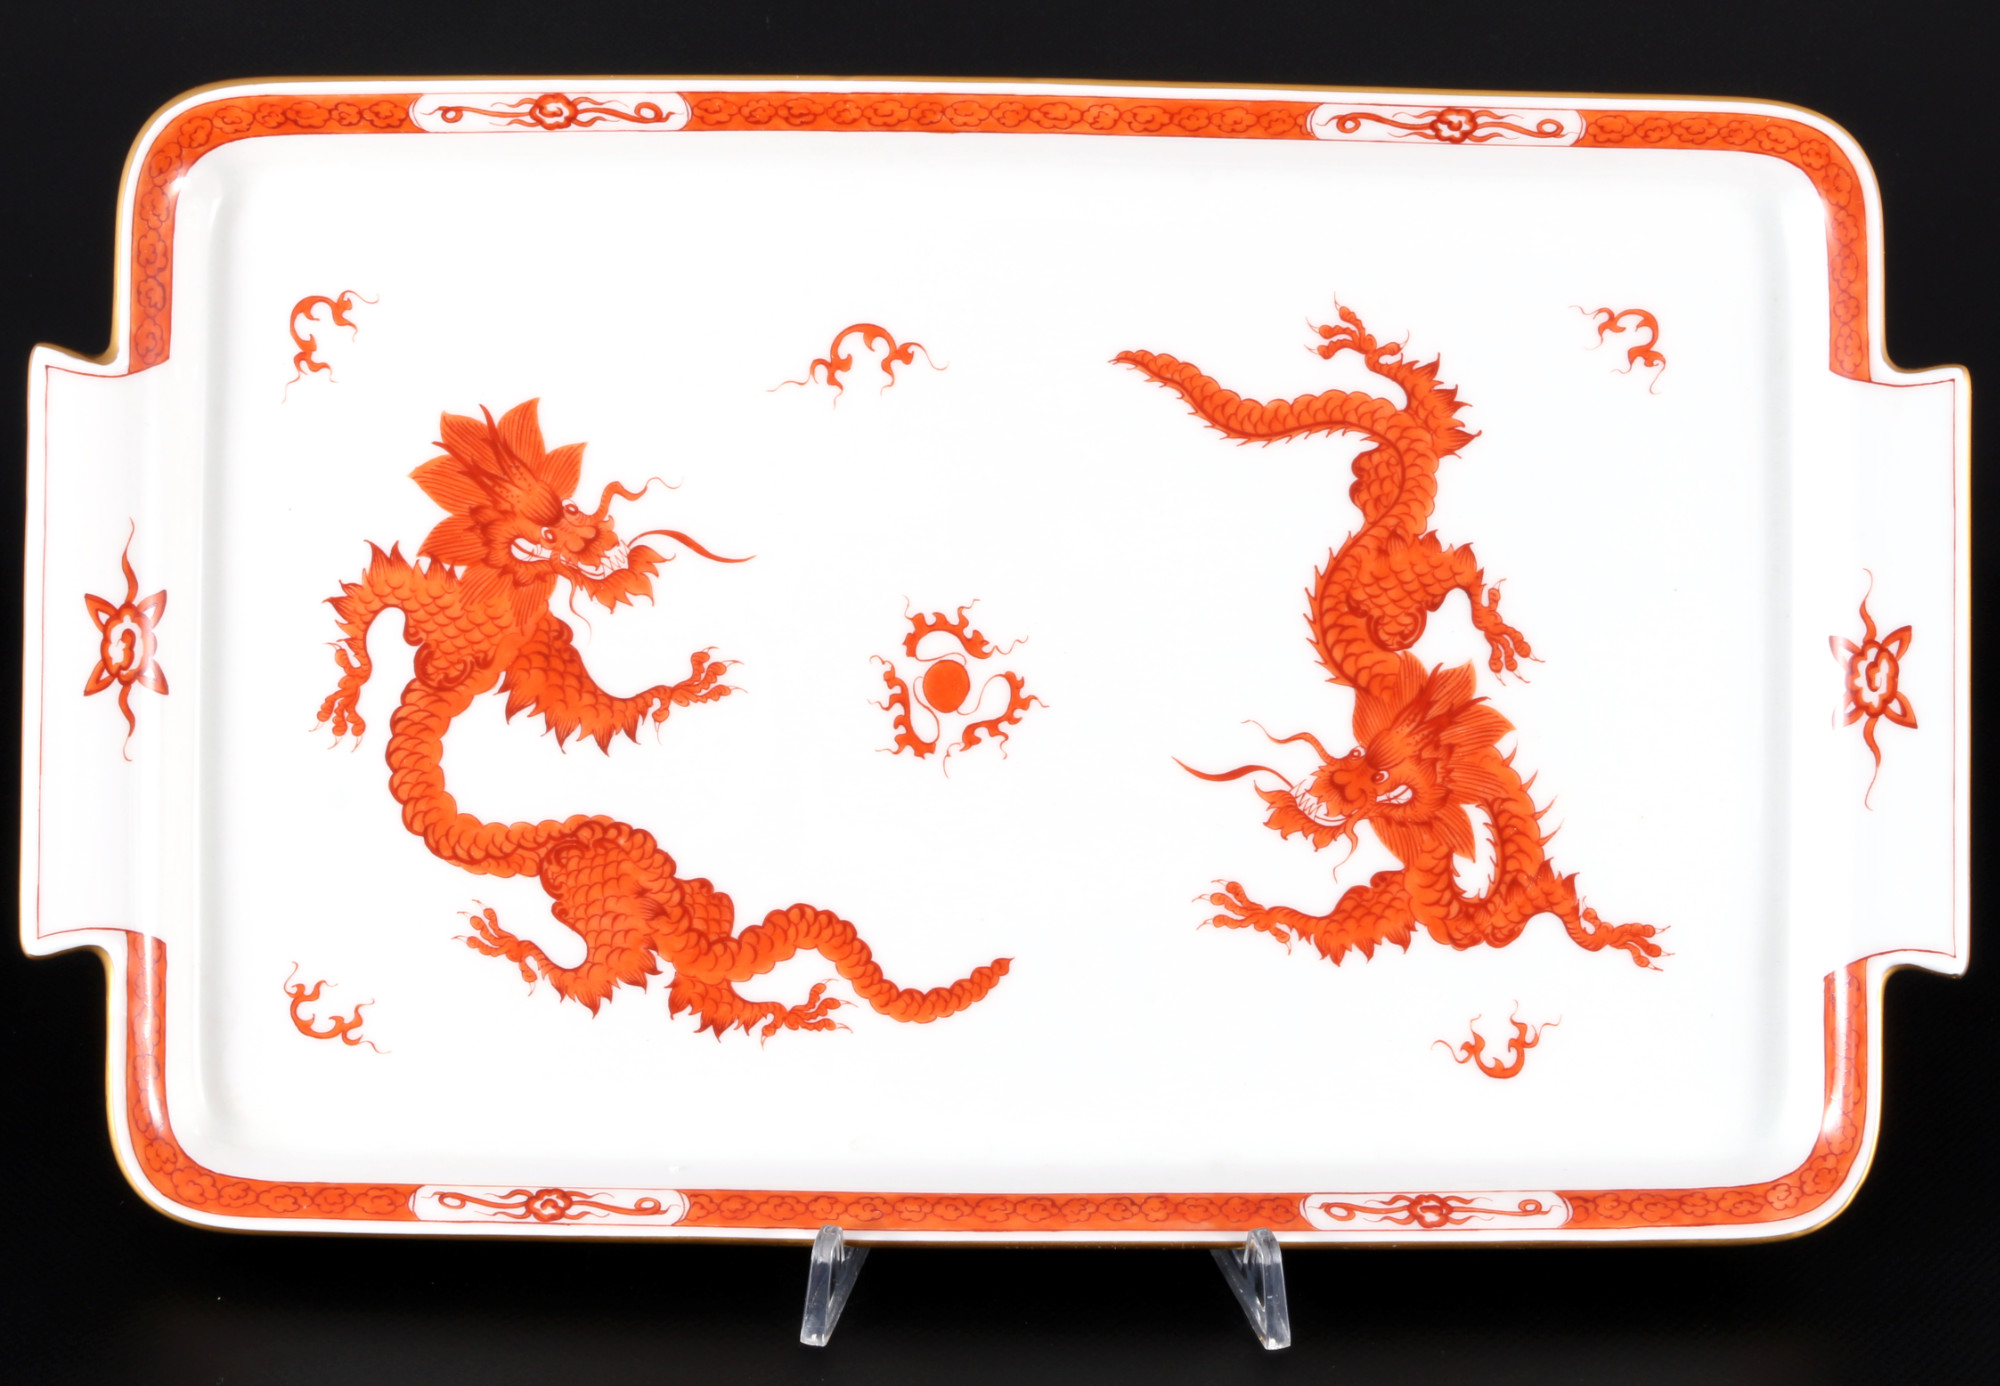 Meissen Red Ming Dragon coffee service for 8 pers. 1st choice, Mingdrache Kaffeeservice für 8 Person - Image 5 of 6